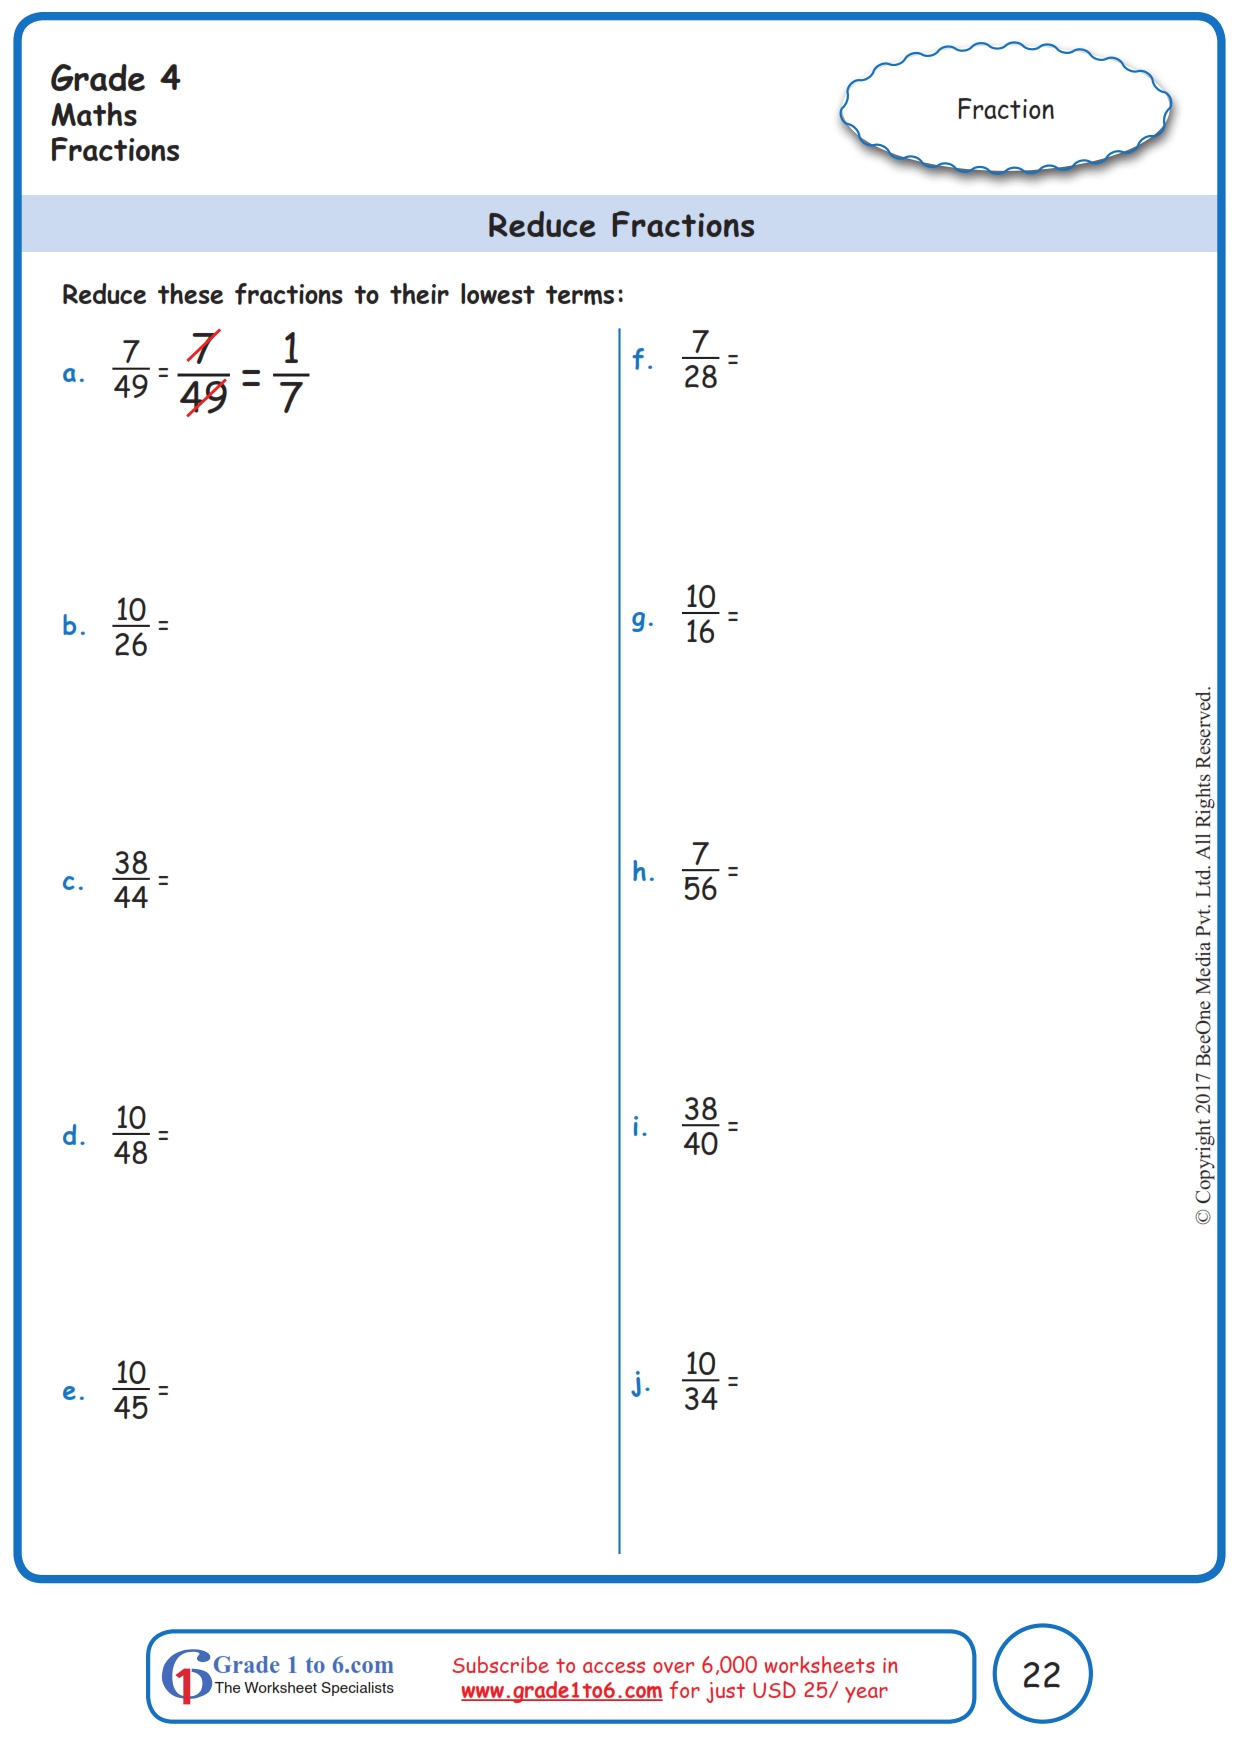 Grade 4 Reducing Fractions Worksheets www grade1to6